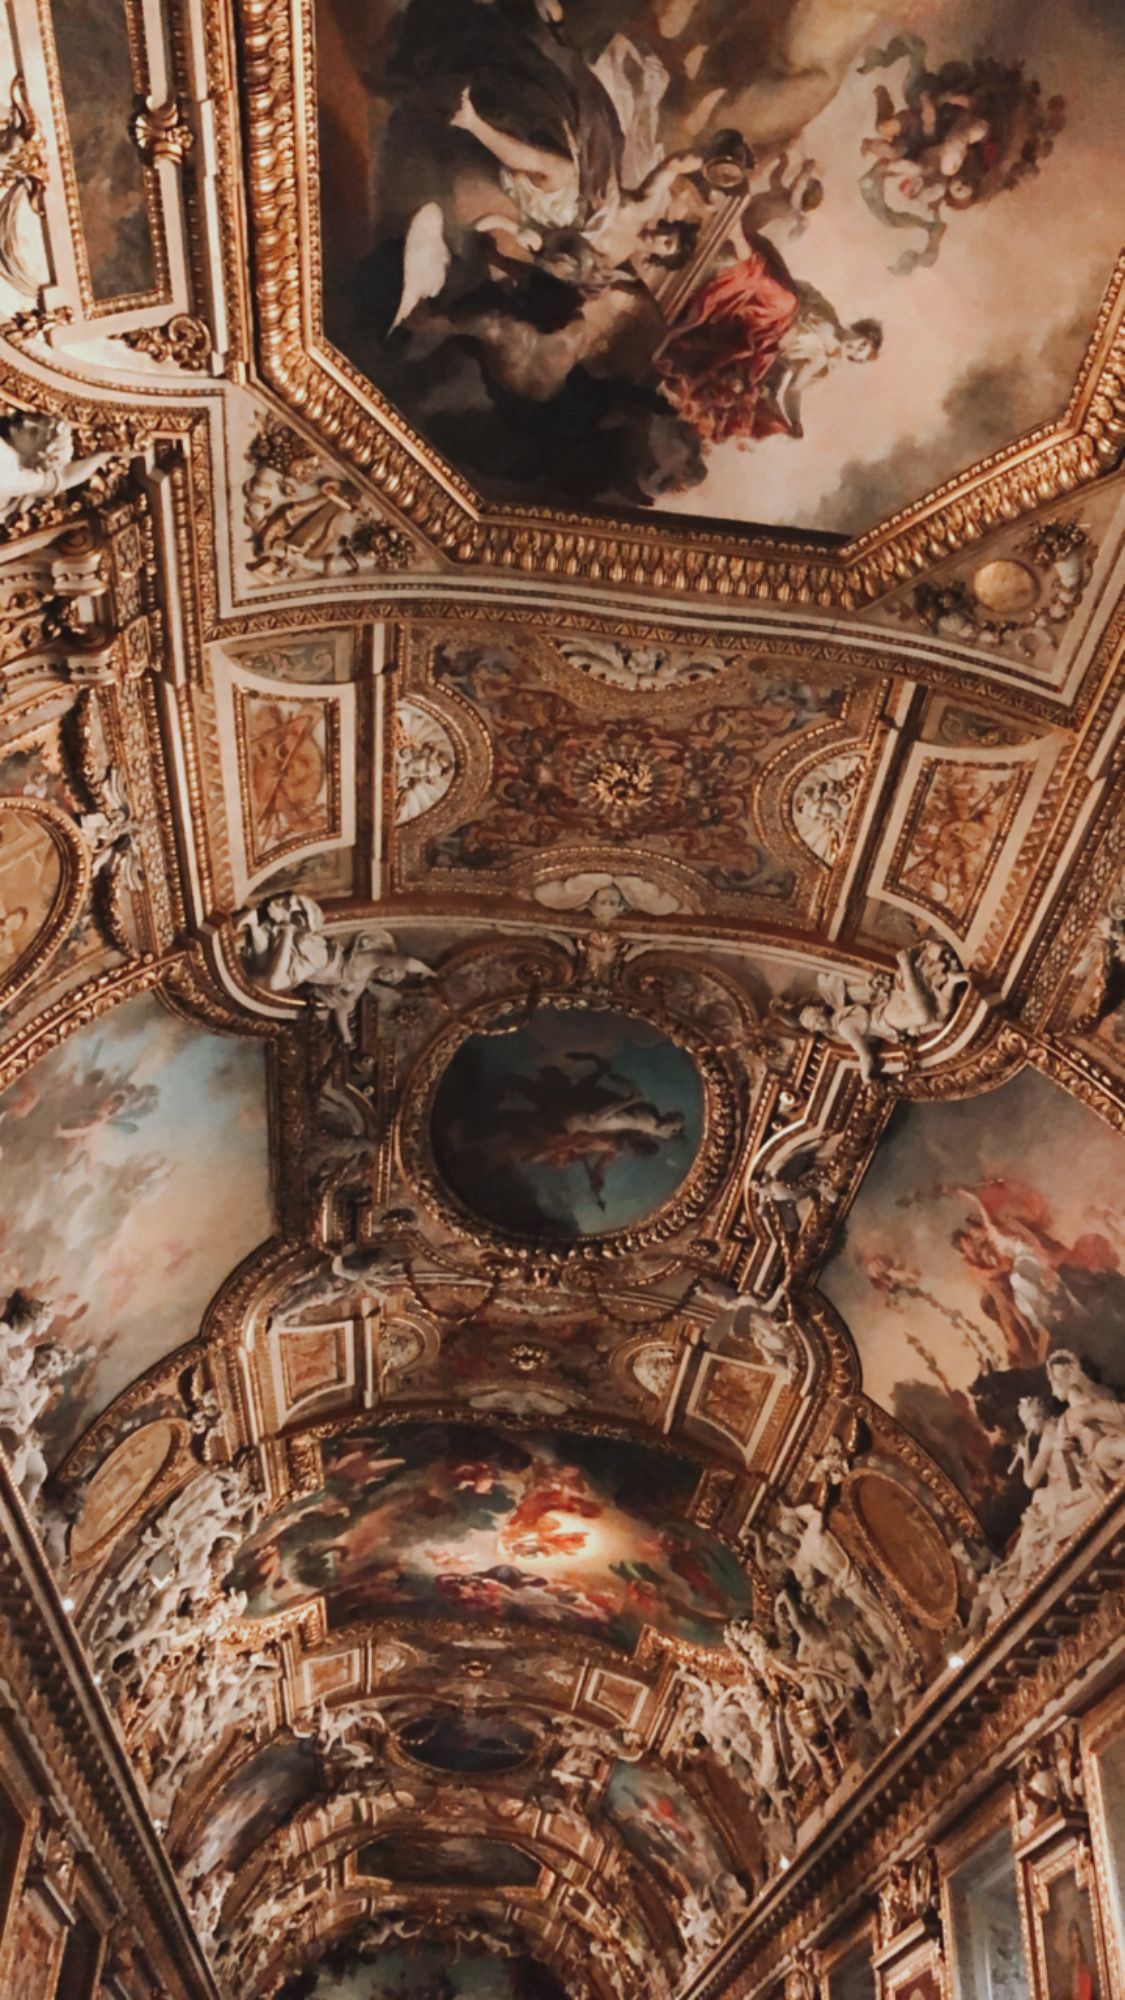 A ceiling with paintings on it - Castle, architecture